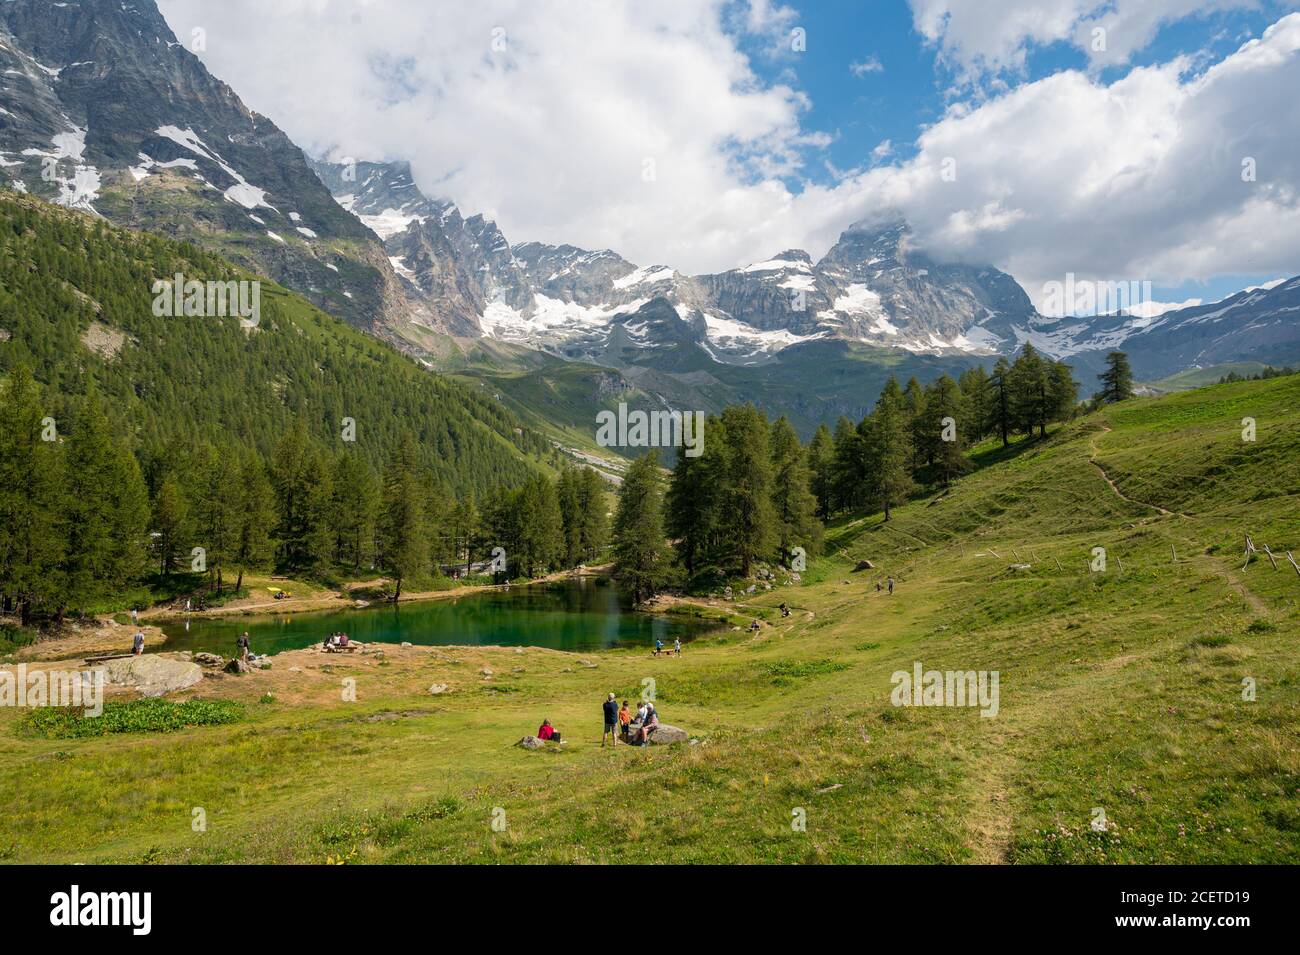 Cervinia, Italy - July 21, 2020: People enjoying Cervinia countryside with views of Matterhorn at Lago Blu Stock Photo